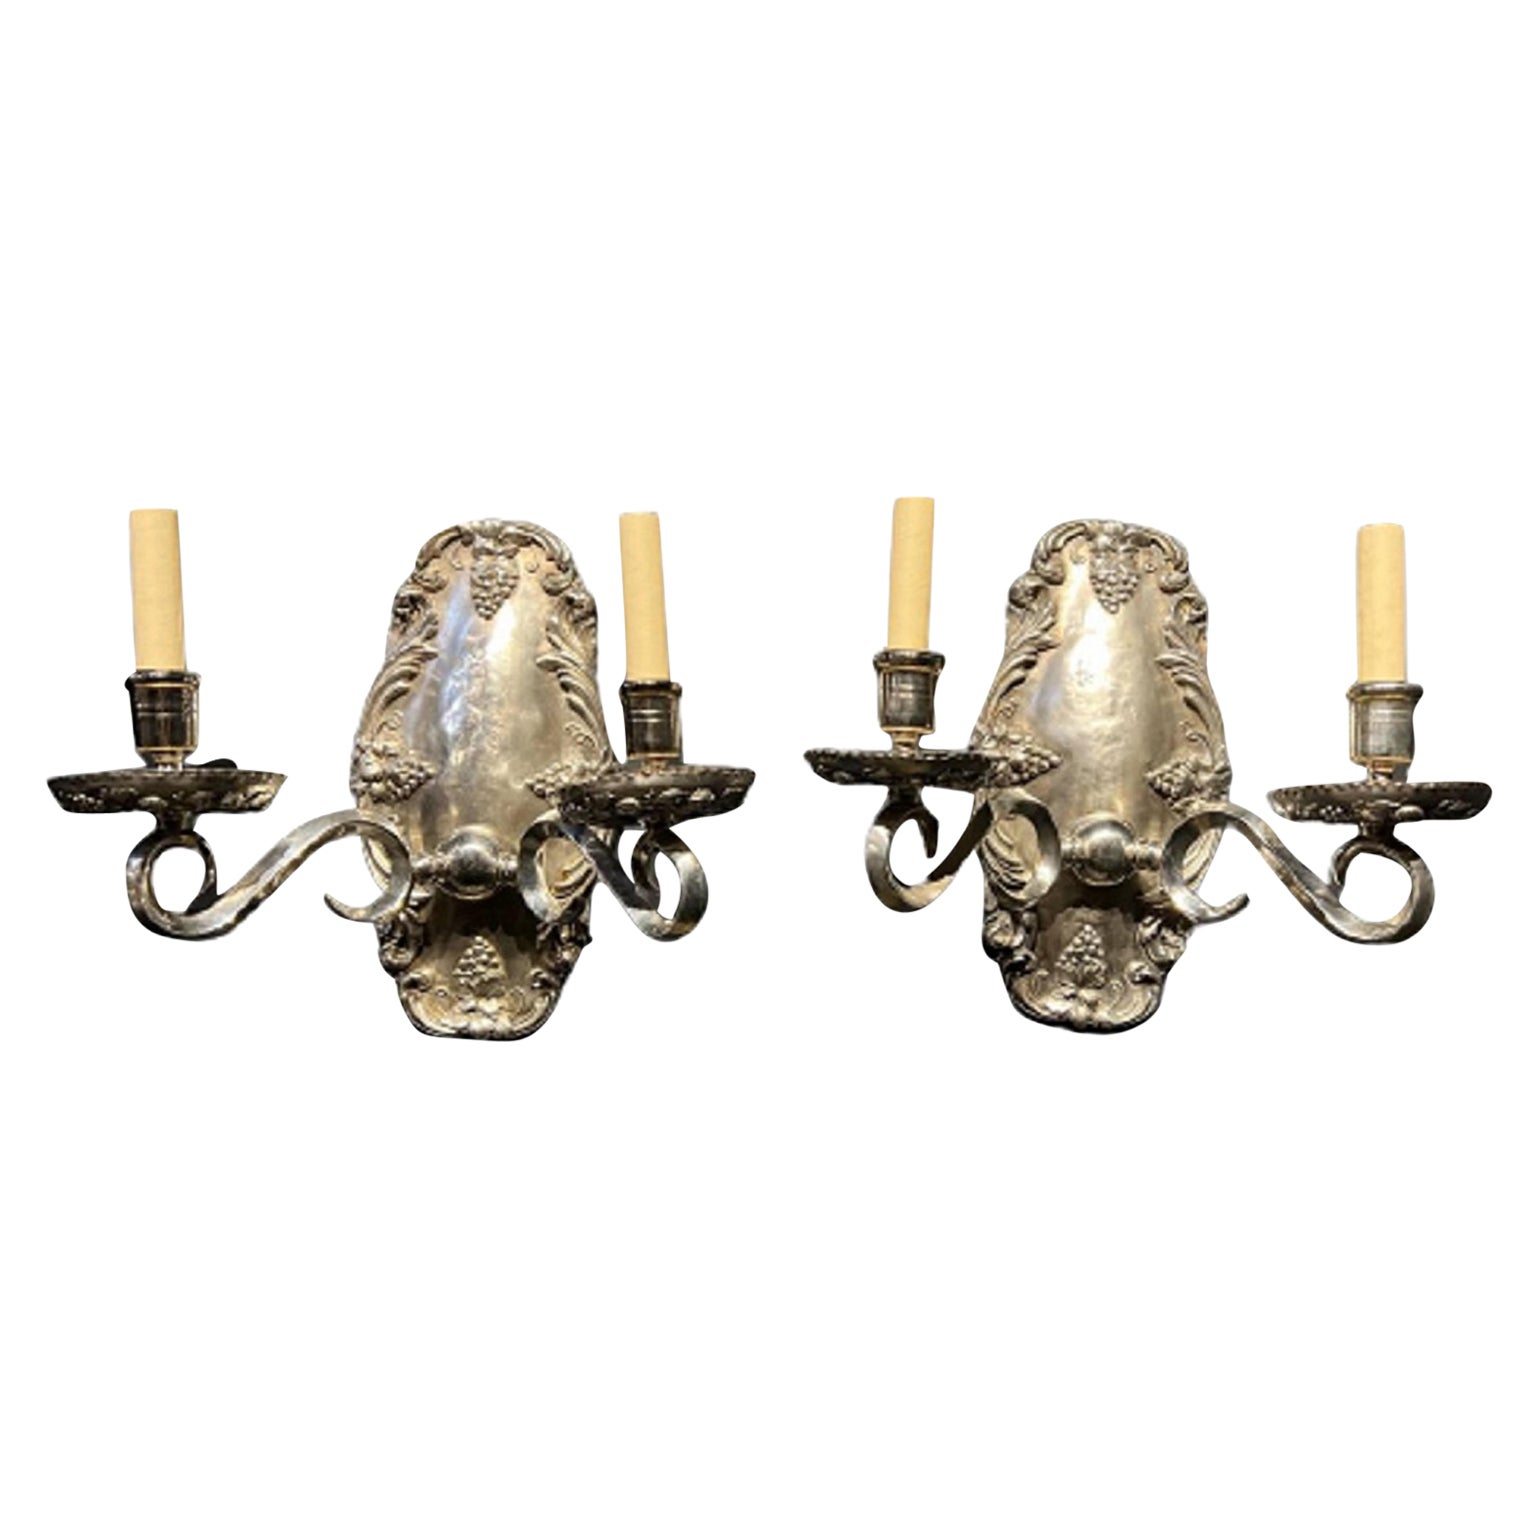 1920’s Caldwell Silver Plated Sconces with Grapes design  For Sale